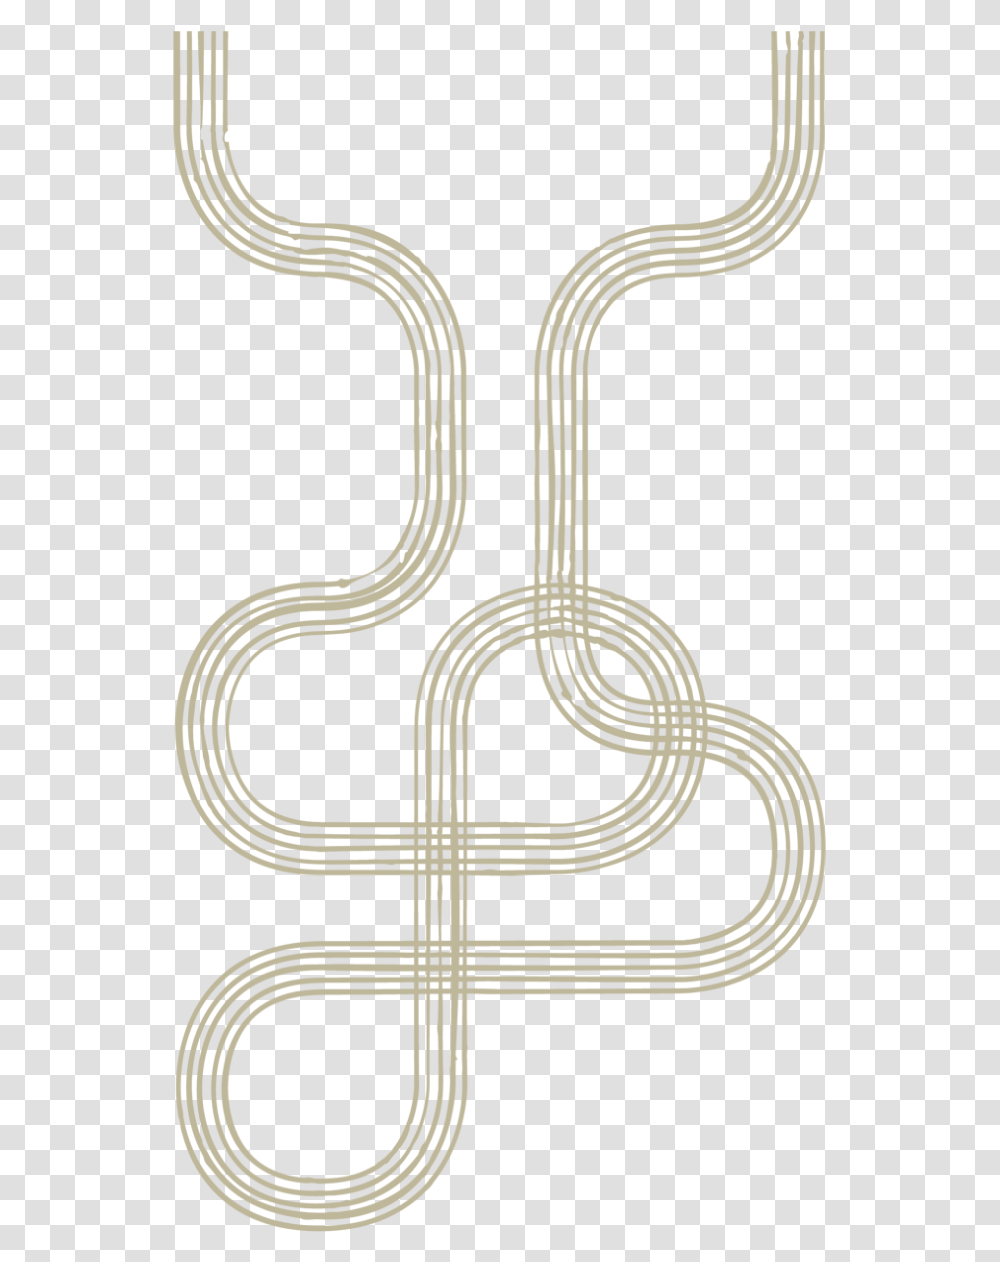 Free Photoshop Brushes, Coil, Spiral, Plumbing, Hose Transparent Png